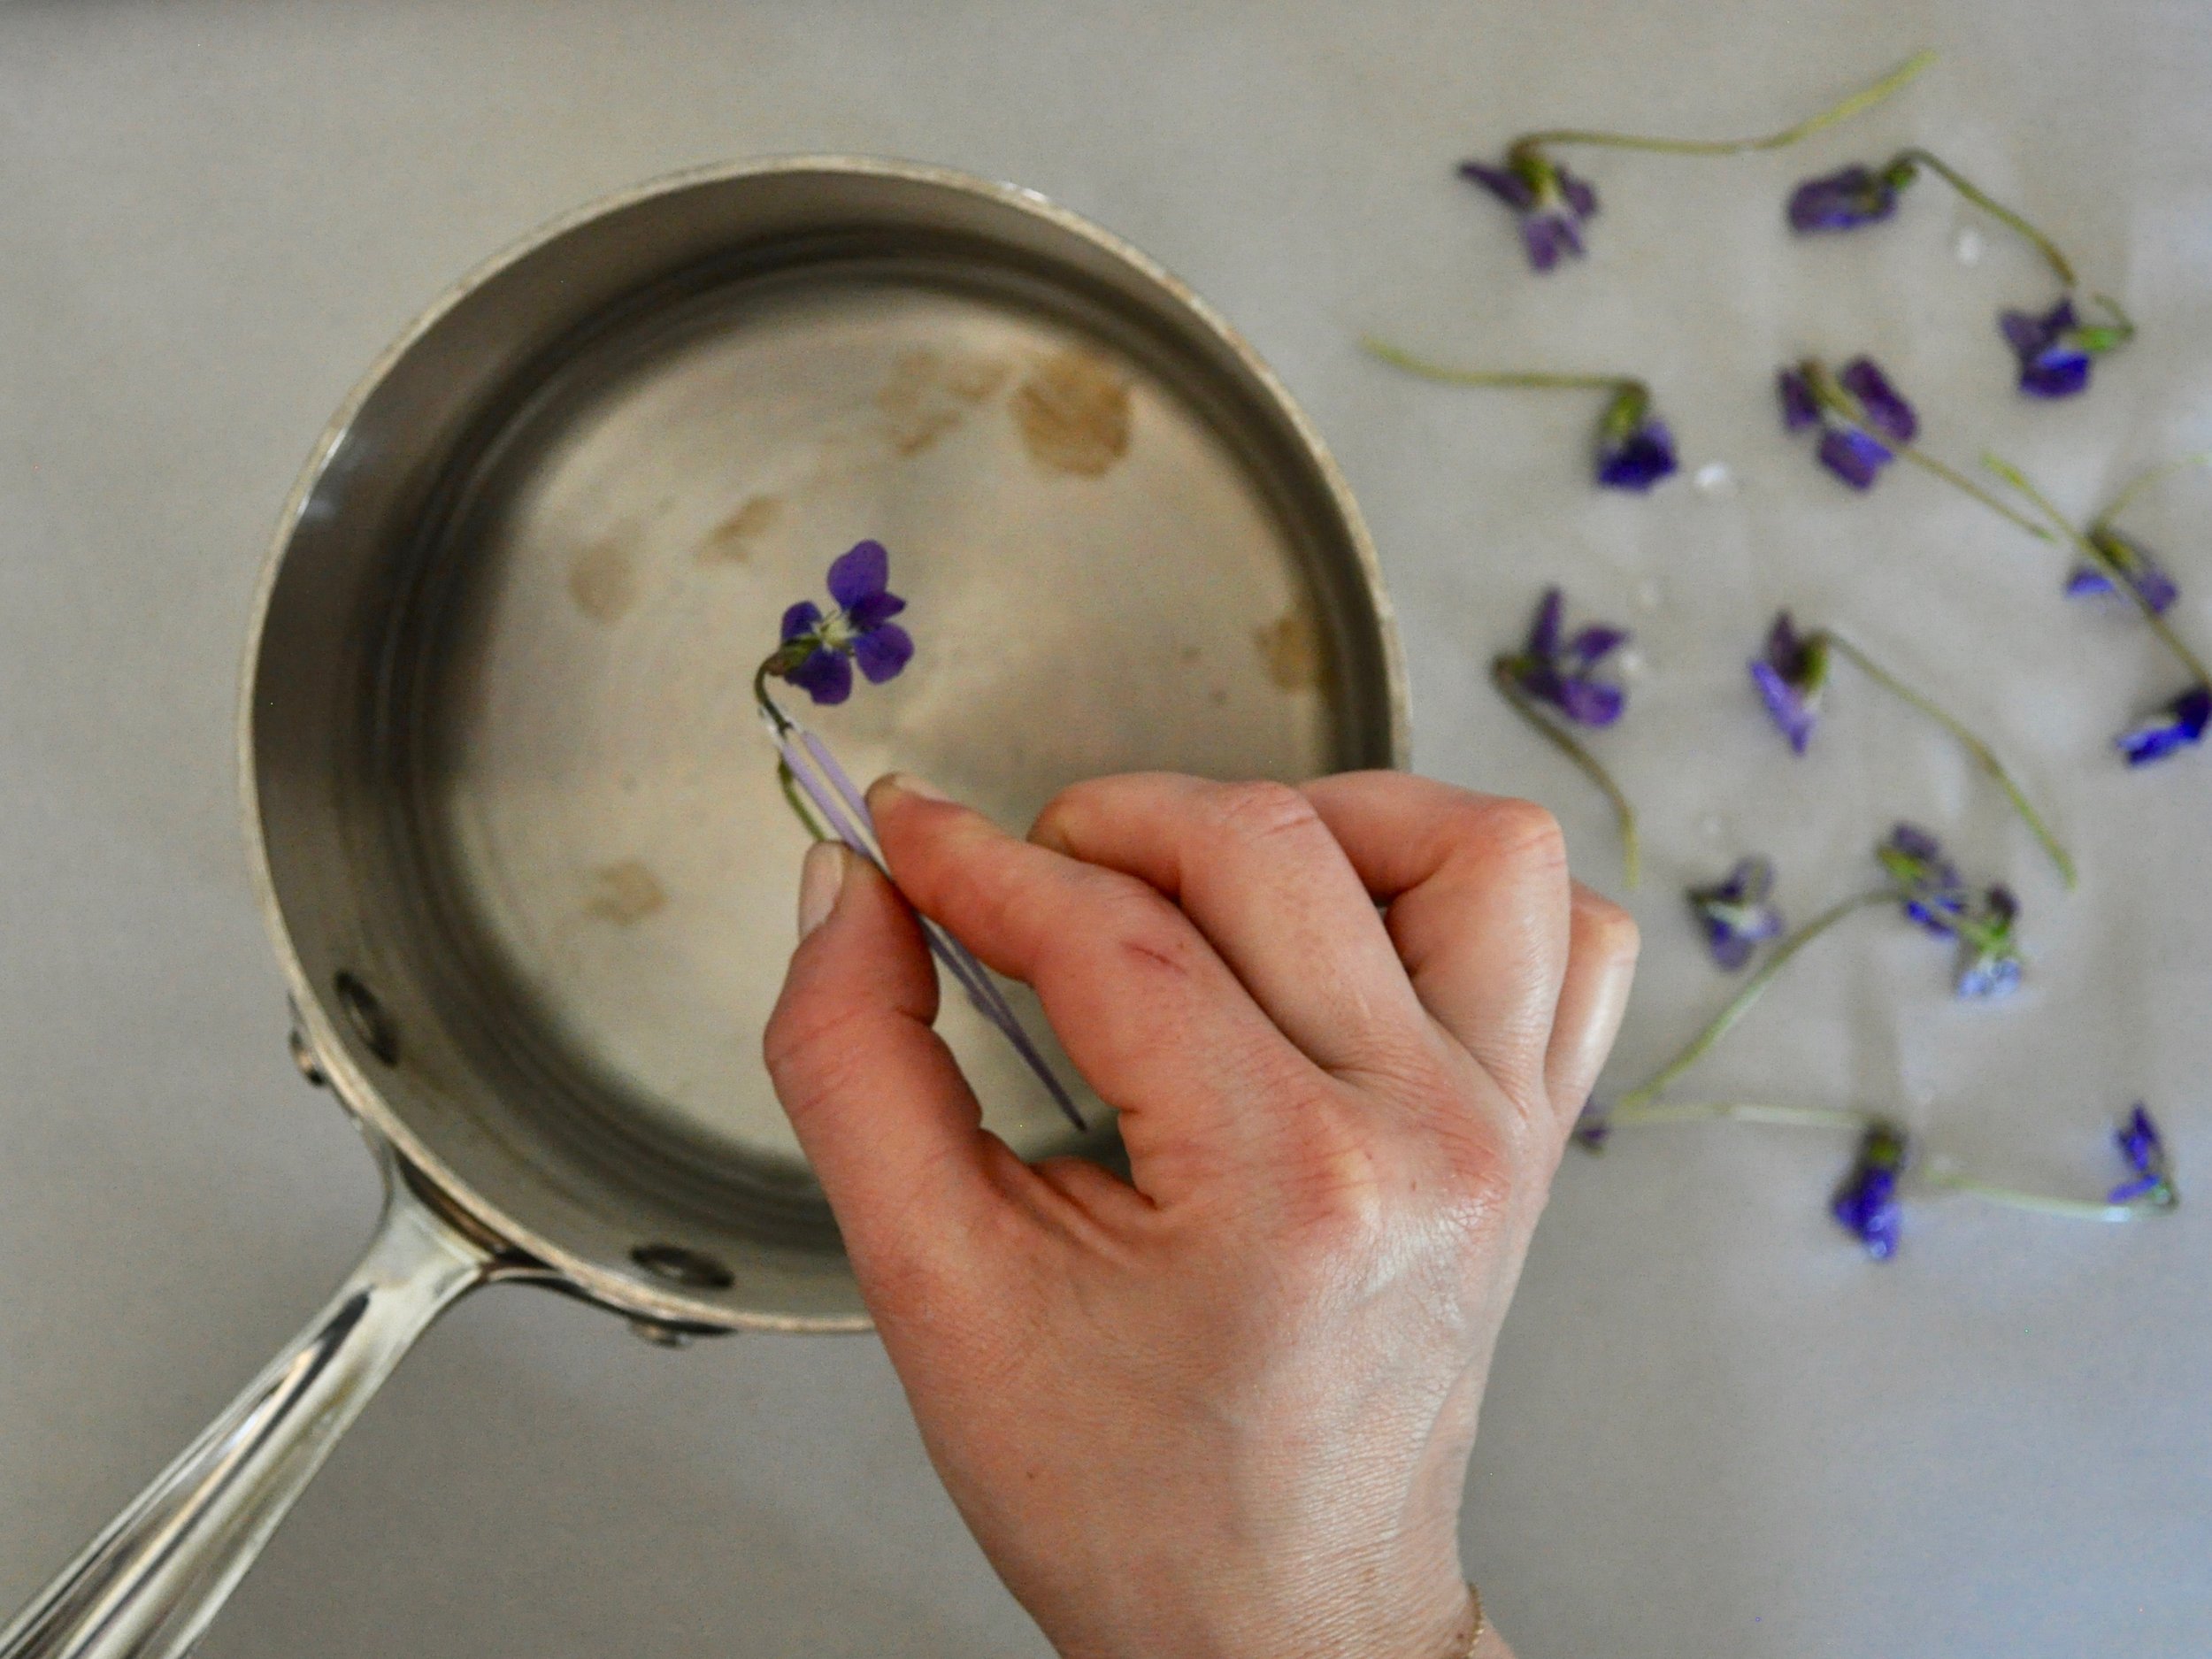 Candied Violets | @beesandbubbles